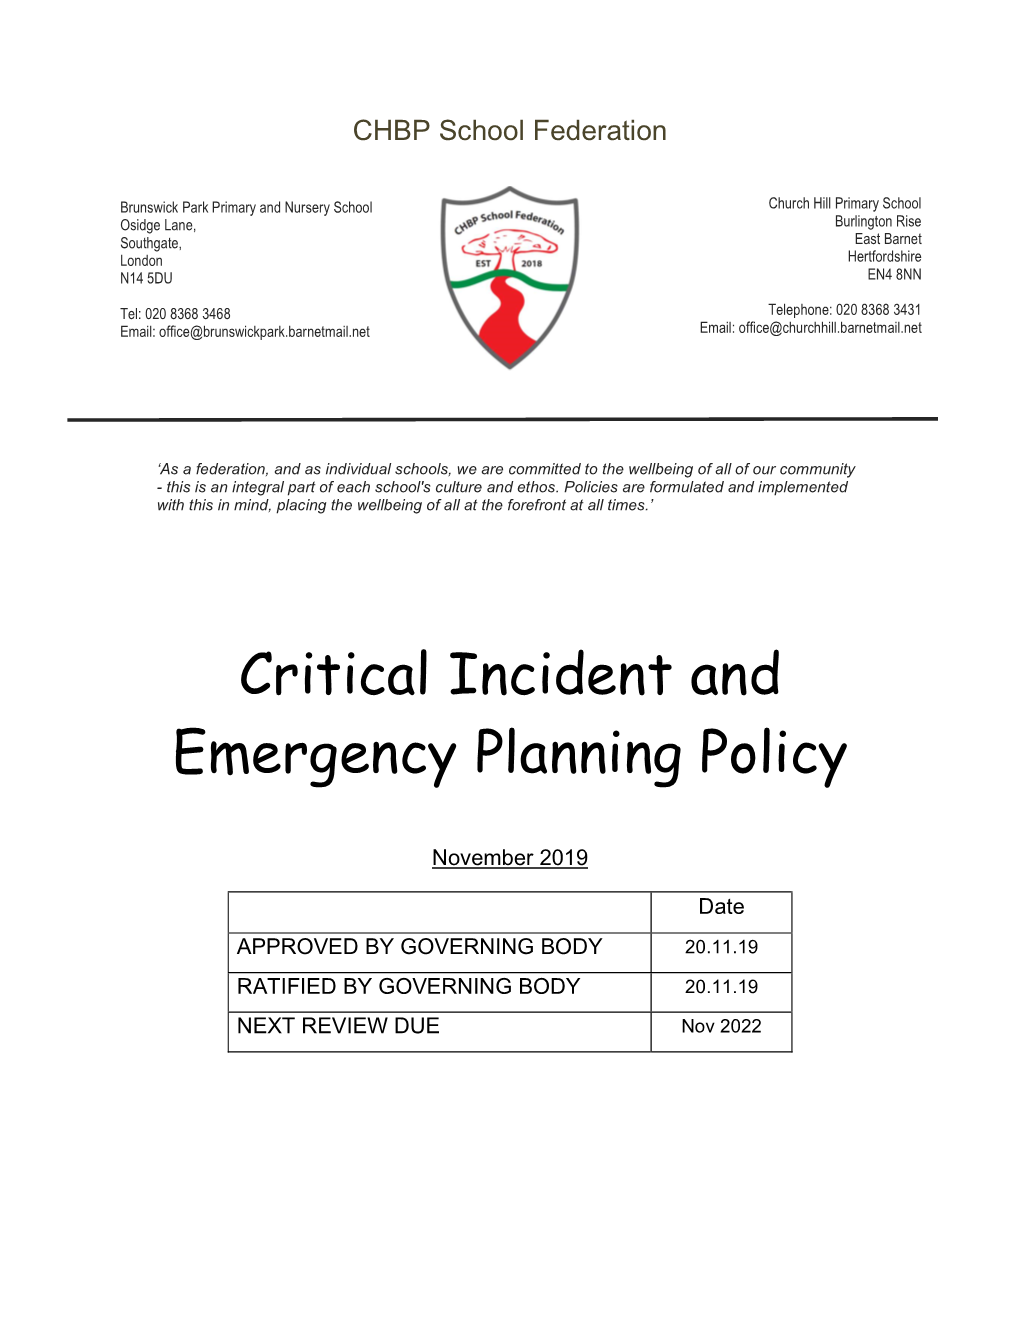 Critical Incident & Emergency Planning